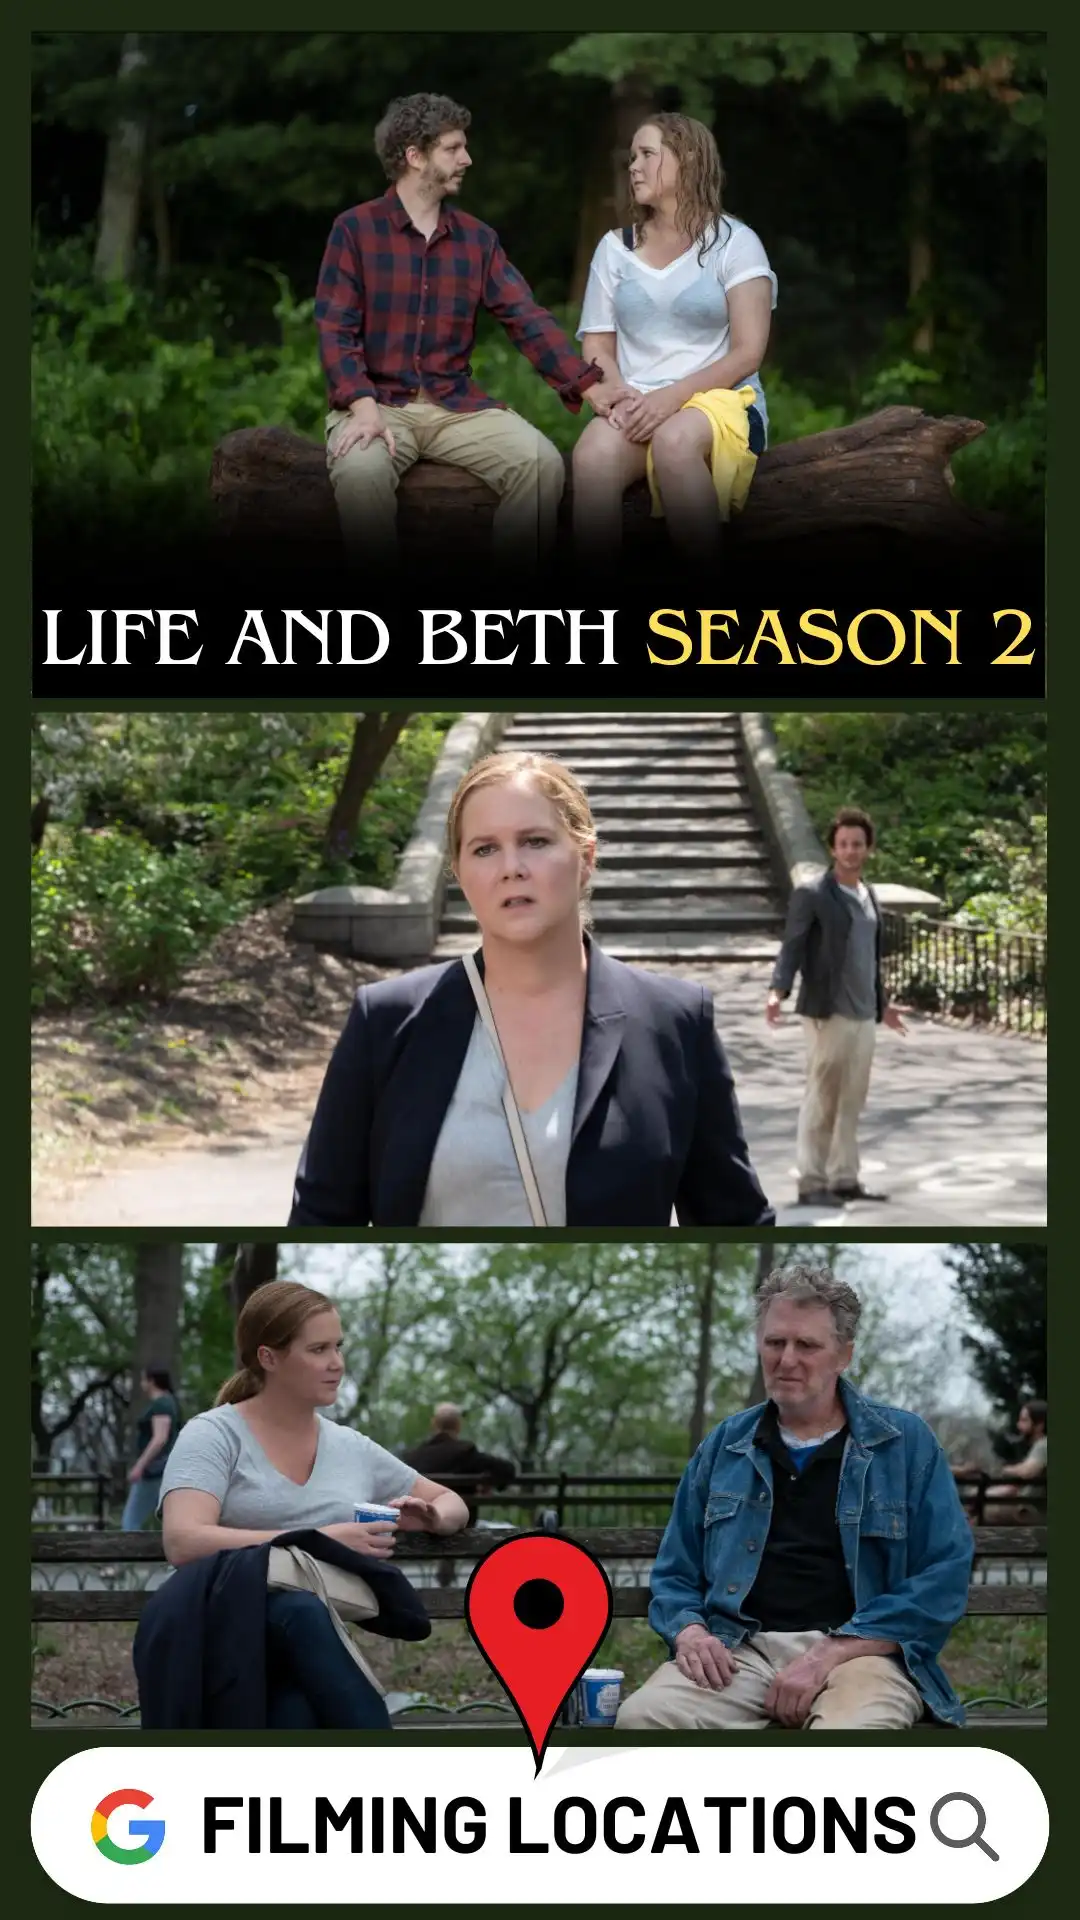 Life and Beth Season 2 Filming Locations